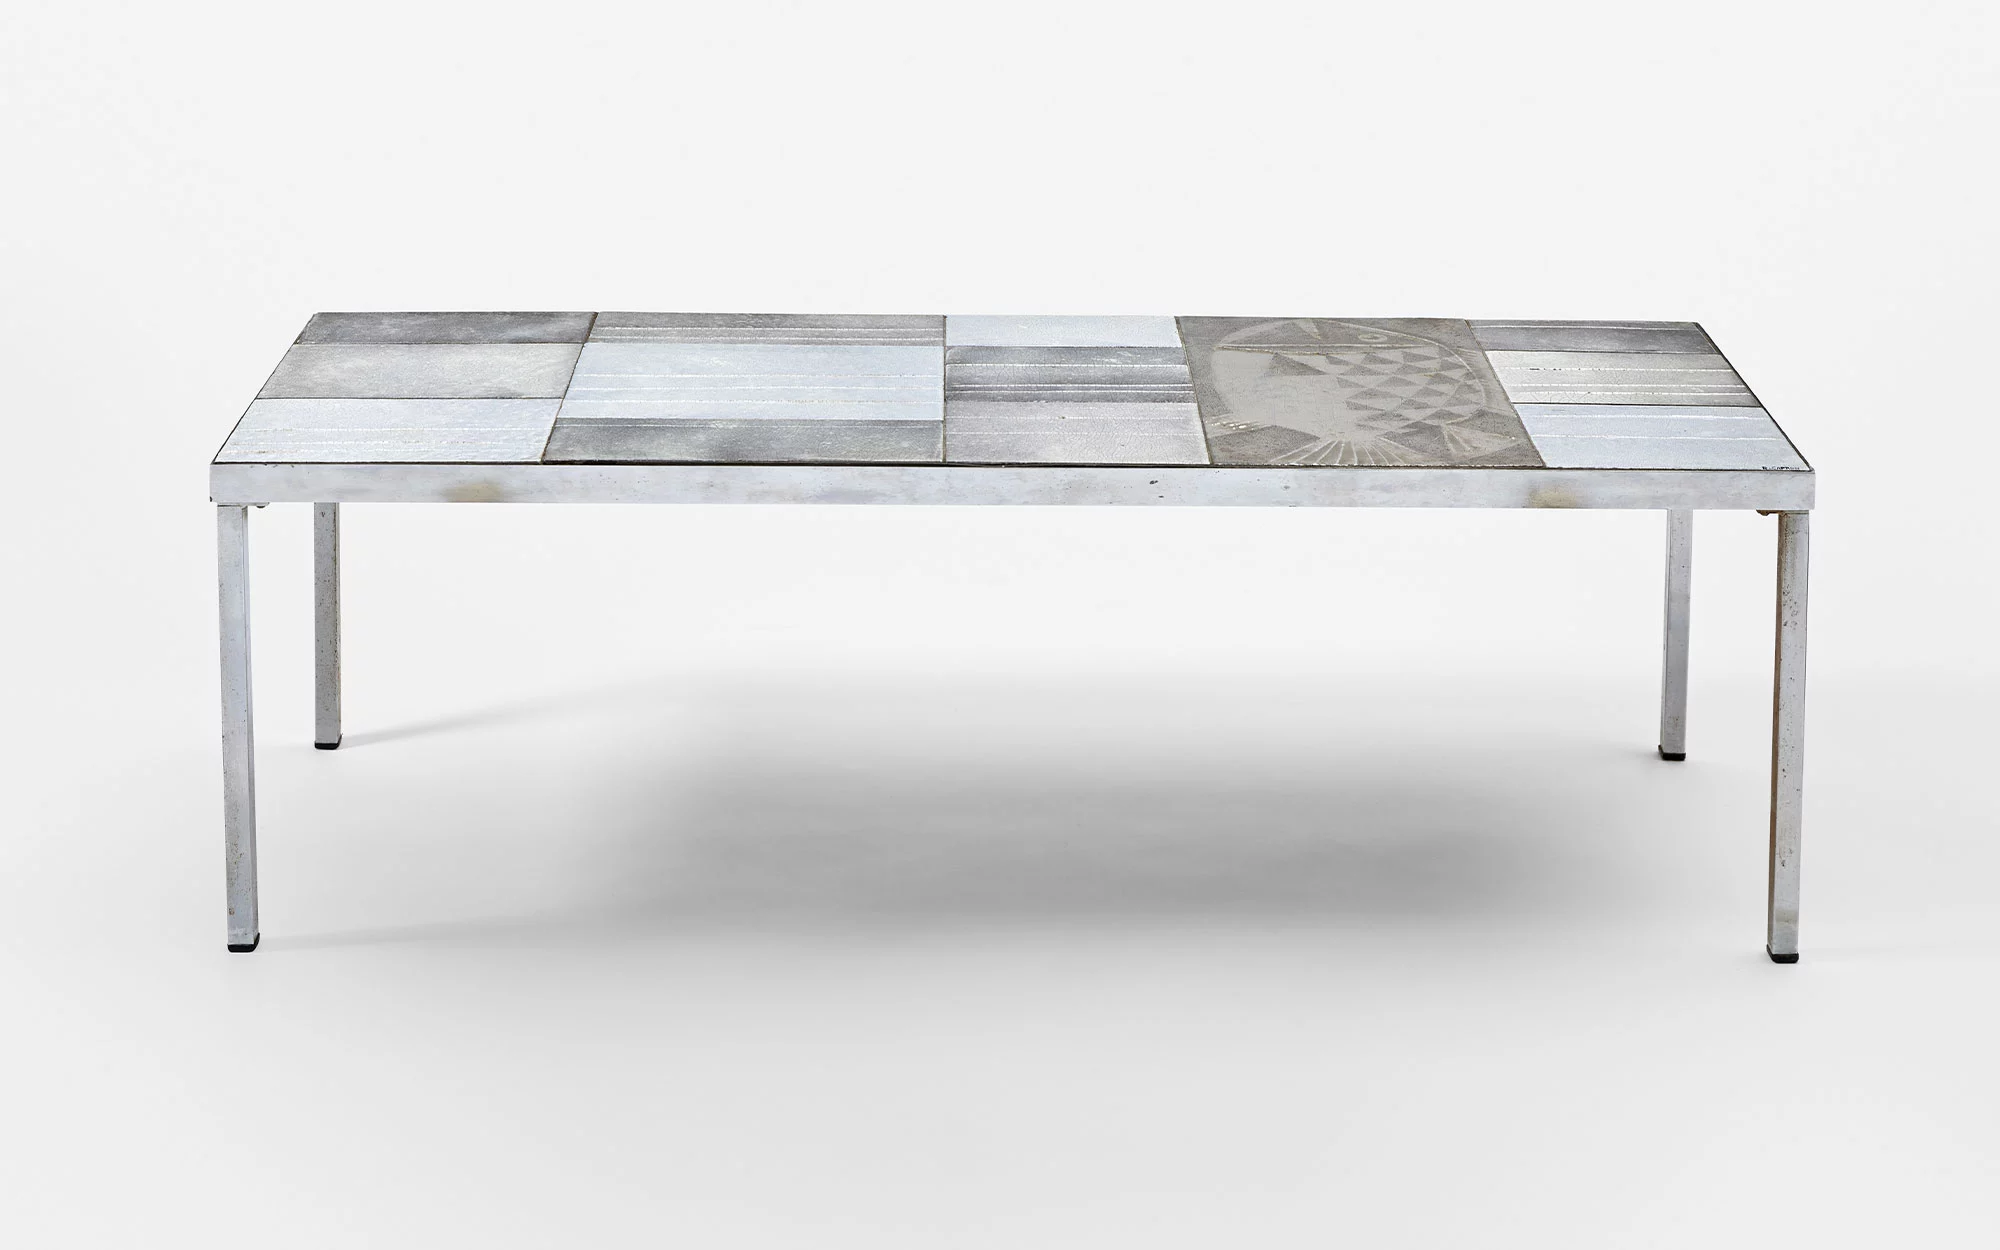 Table basse Poisson - Roger Capron - coffee-table table- Galerie kreo